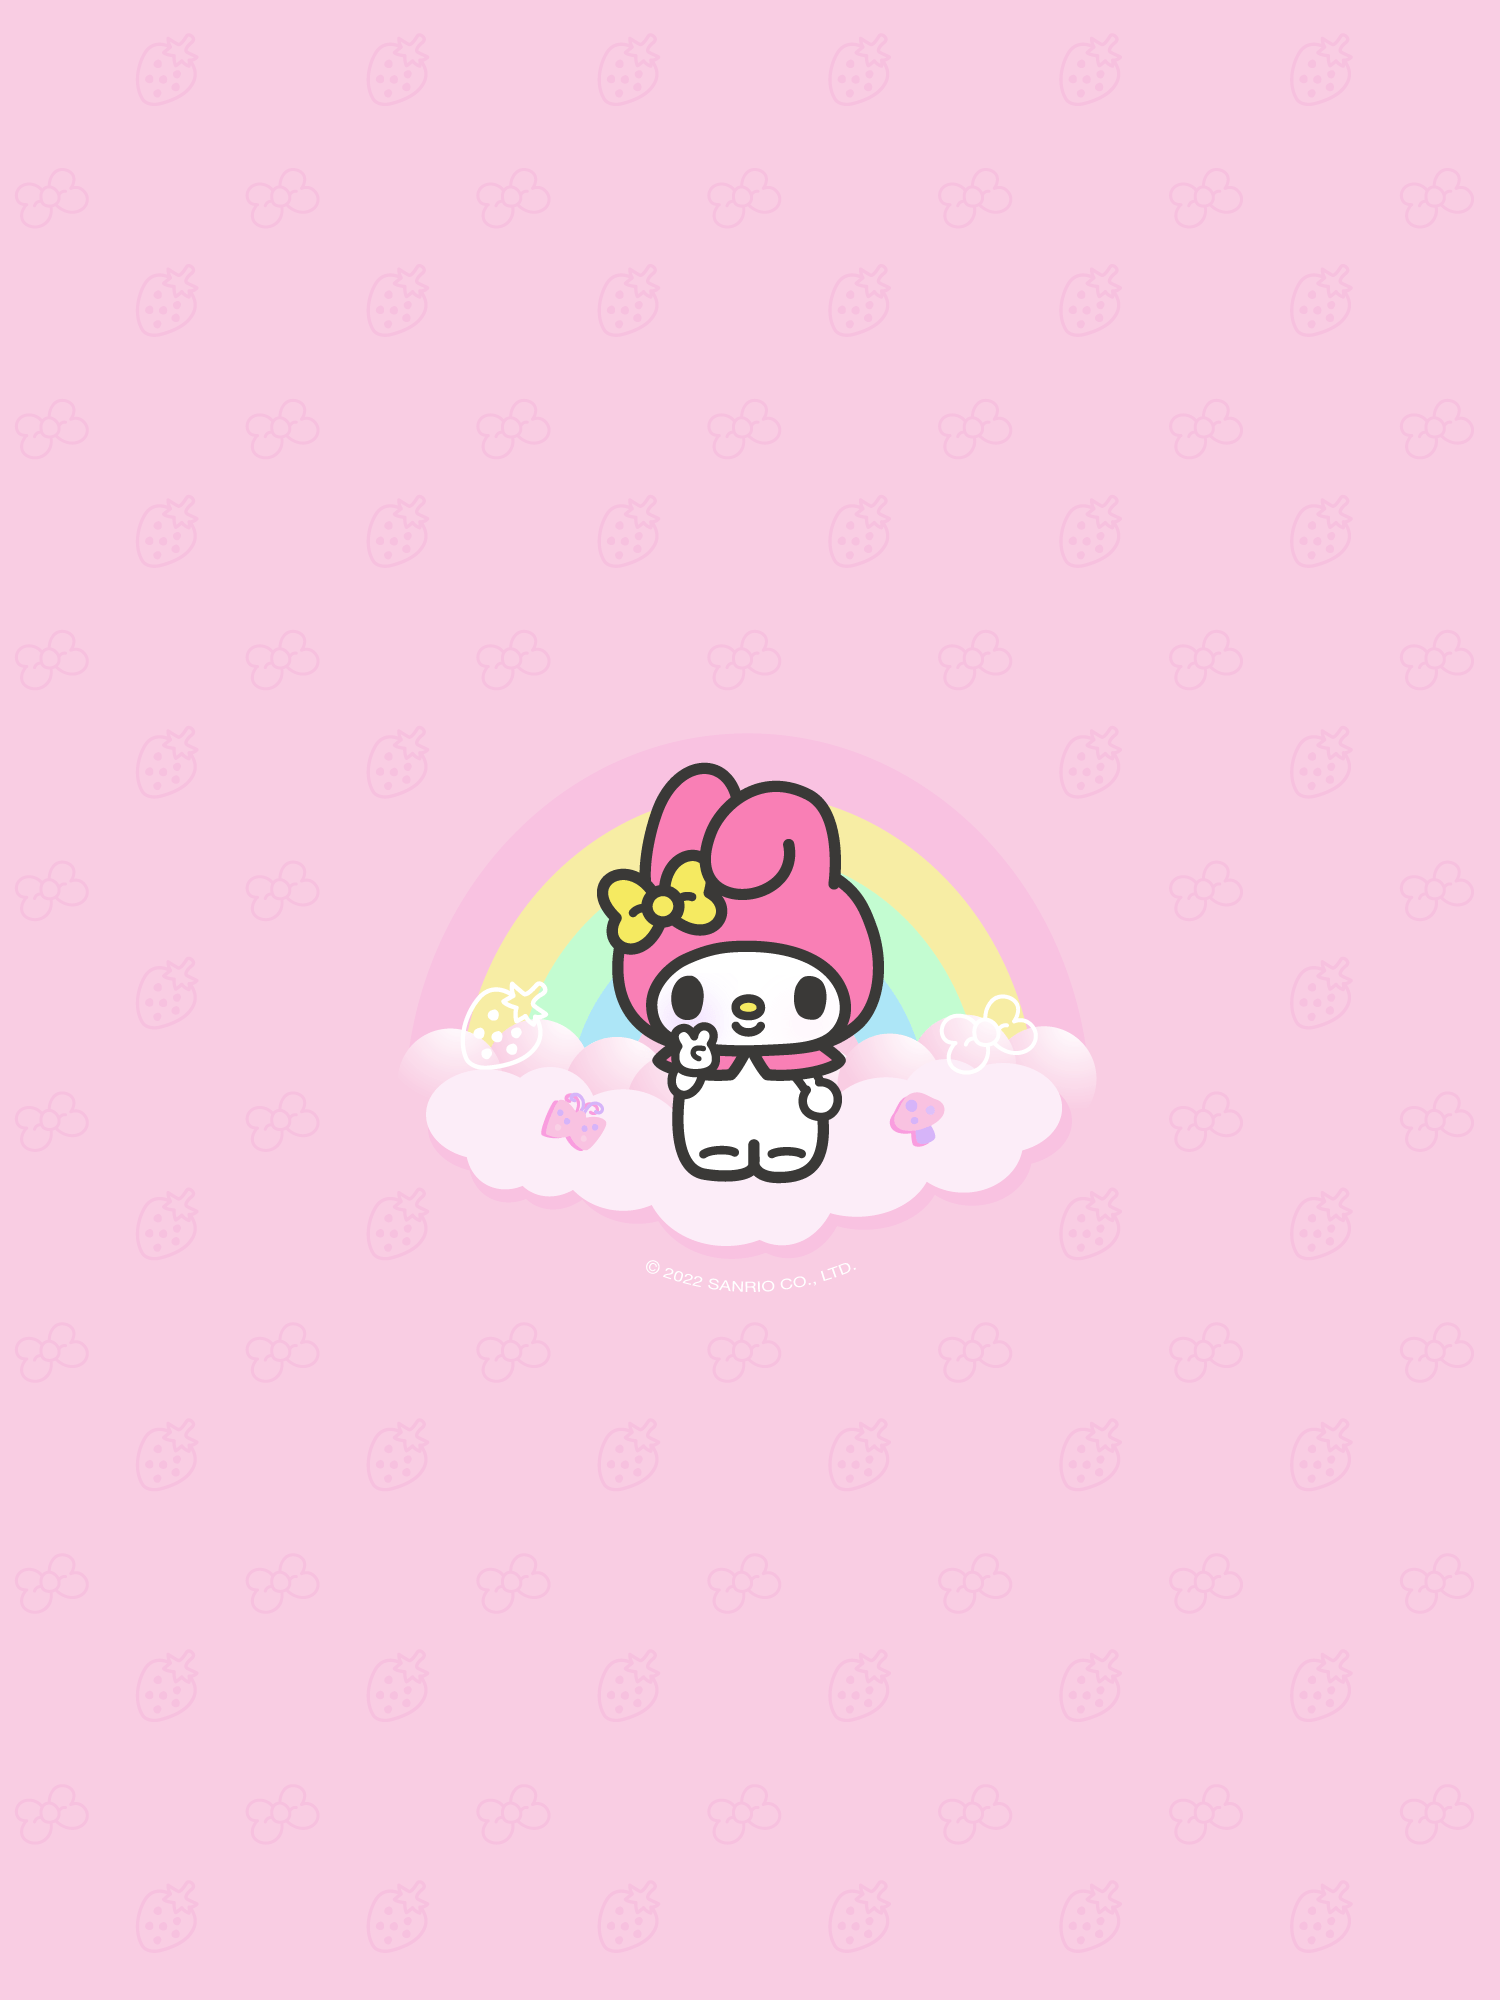 My melody wallpaper background pink clouds rainbow cute kawaii wallpaper background pink clouds rainbow cute kawaii - Hello Kitty, Kuromi, Sanrio